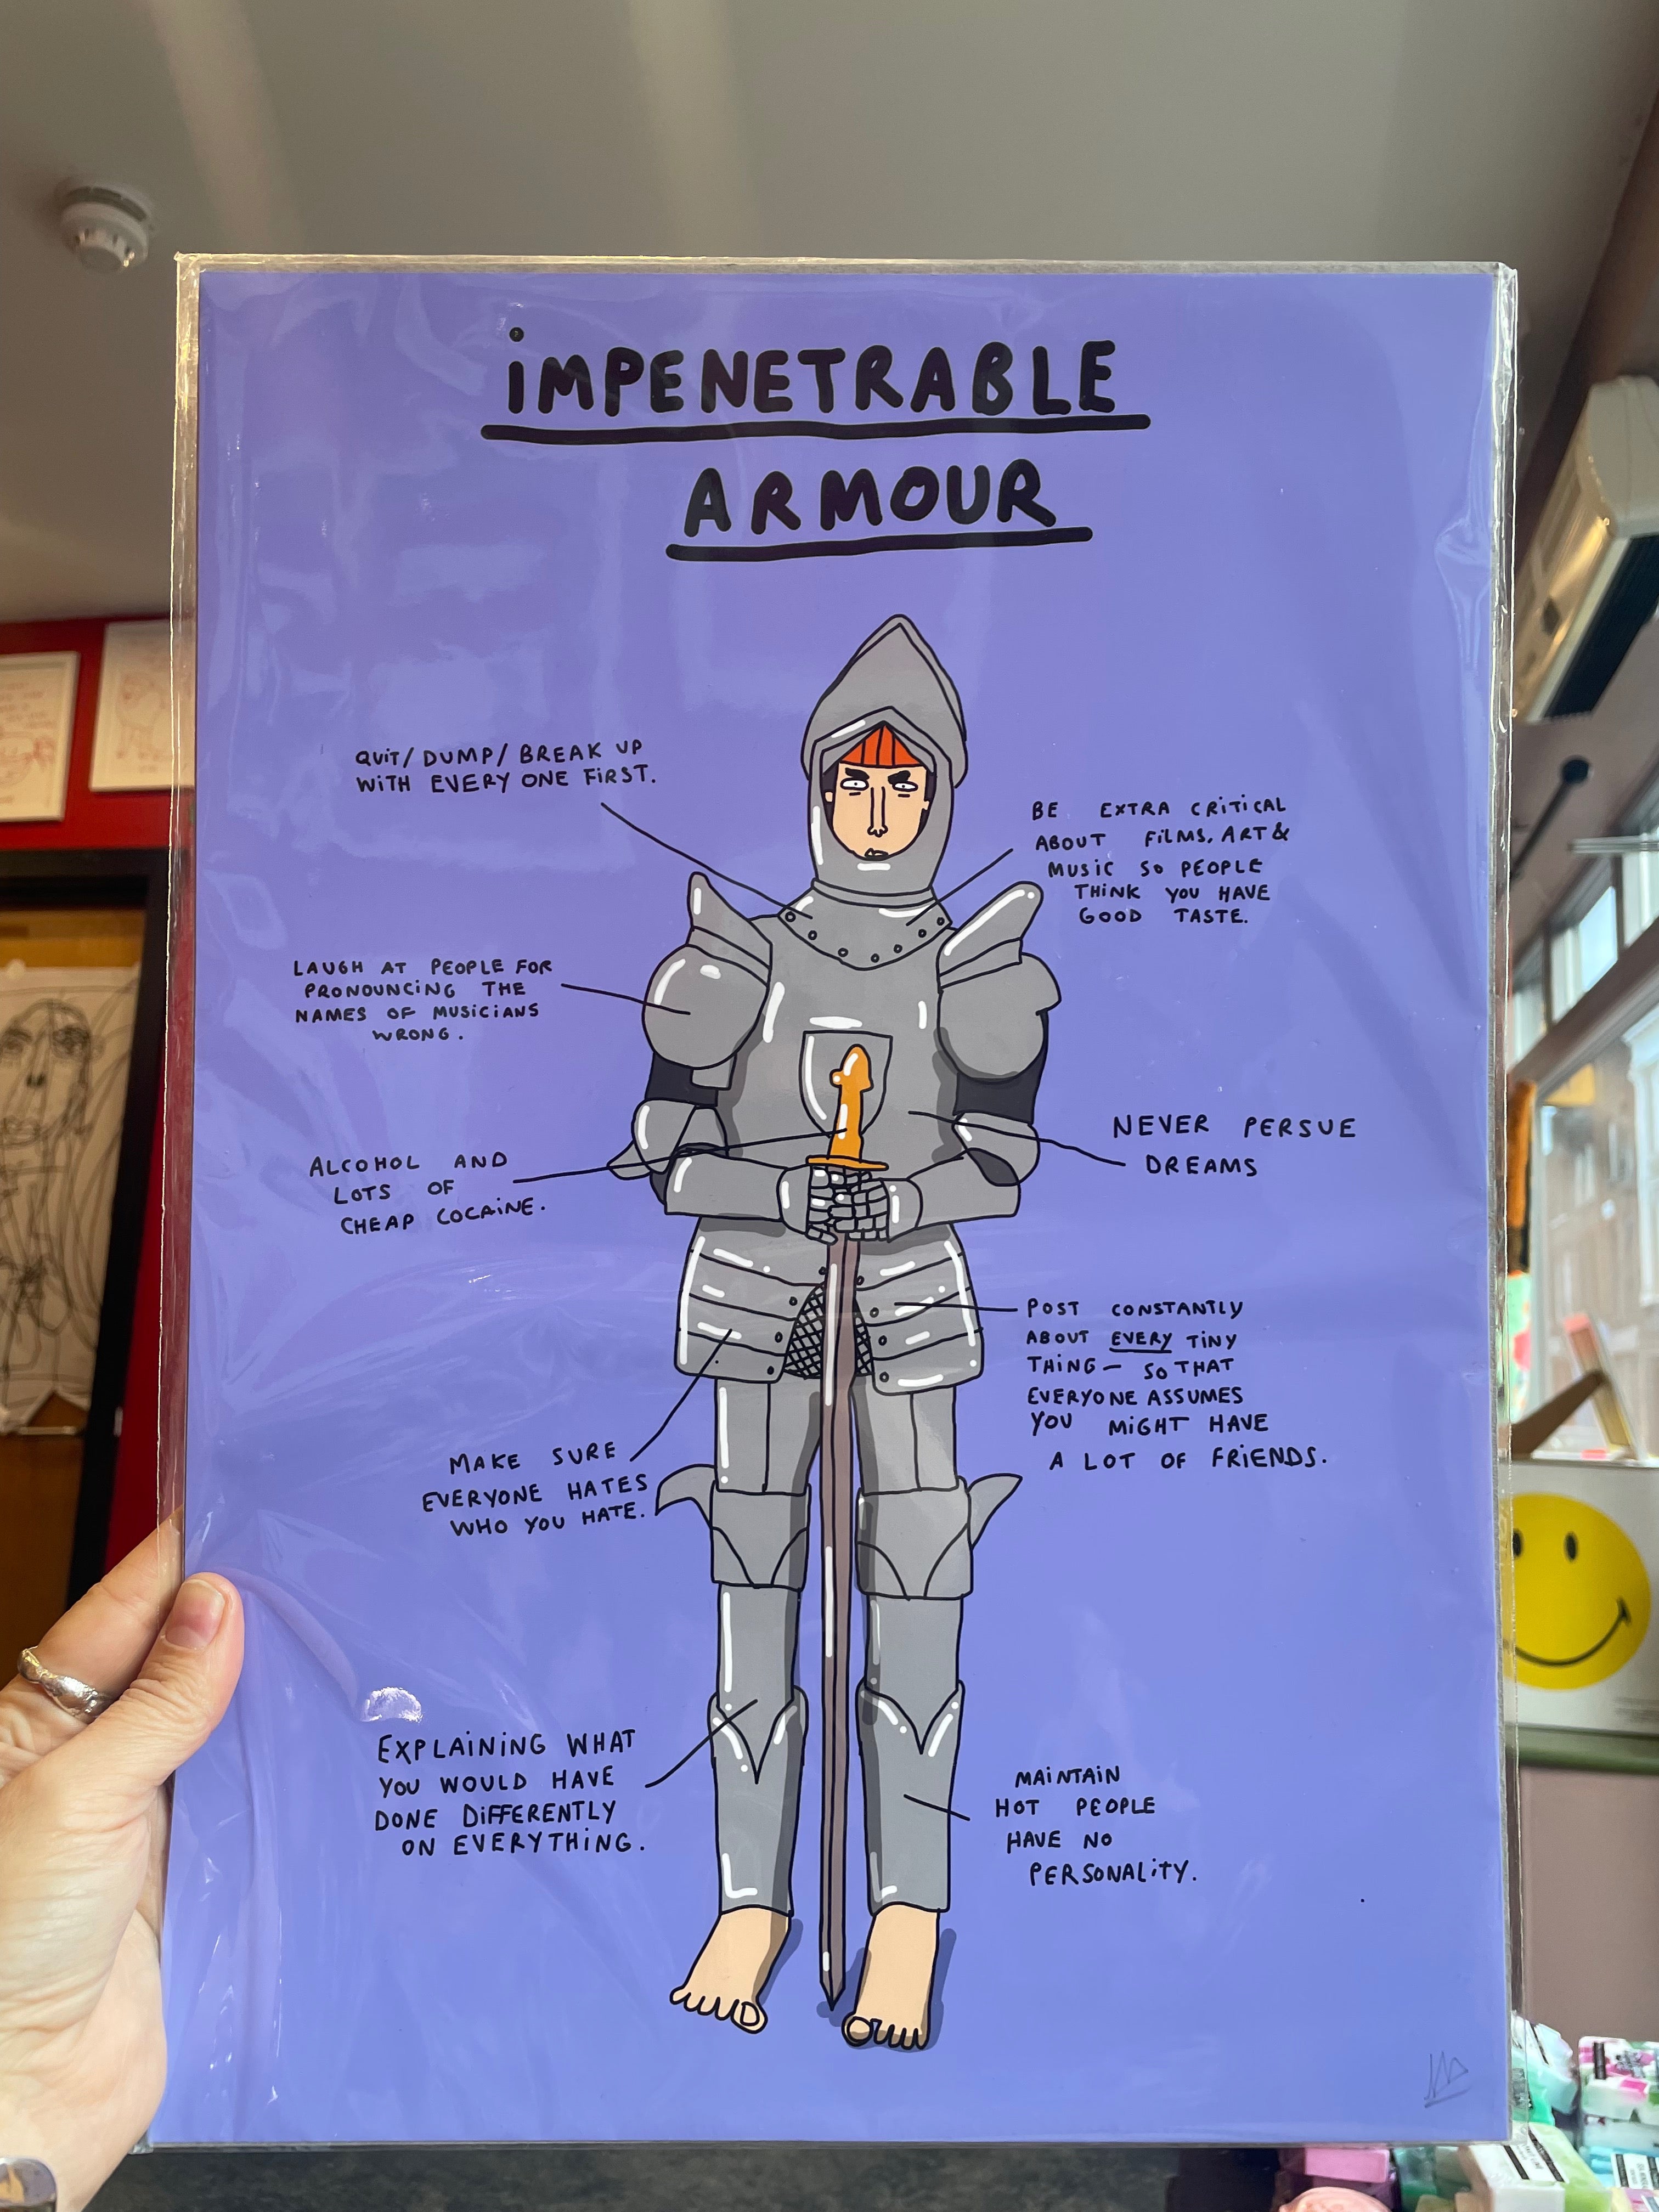 Impenetrable Armour by I fucking hate London